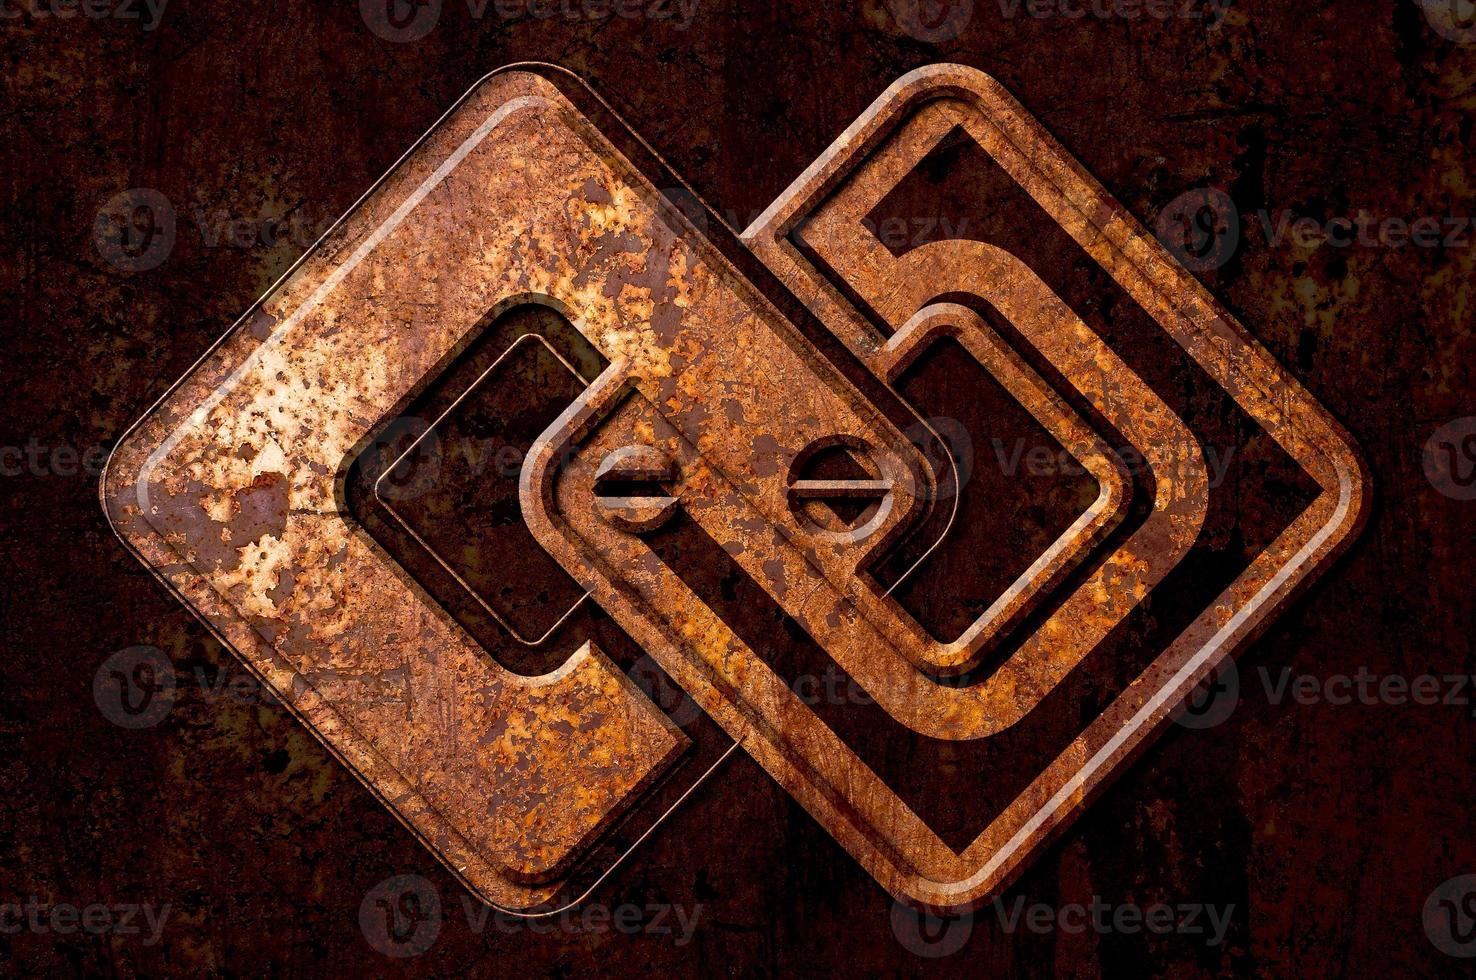 Infinity sign on the metal rust background photo